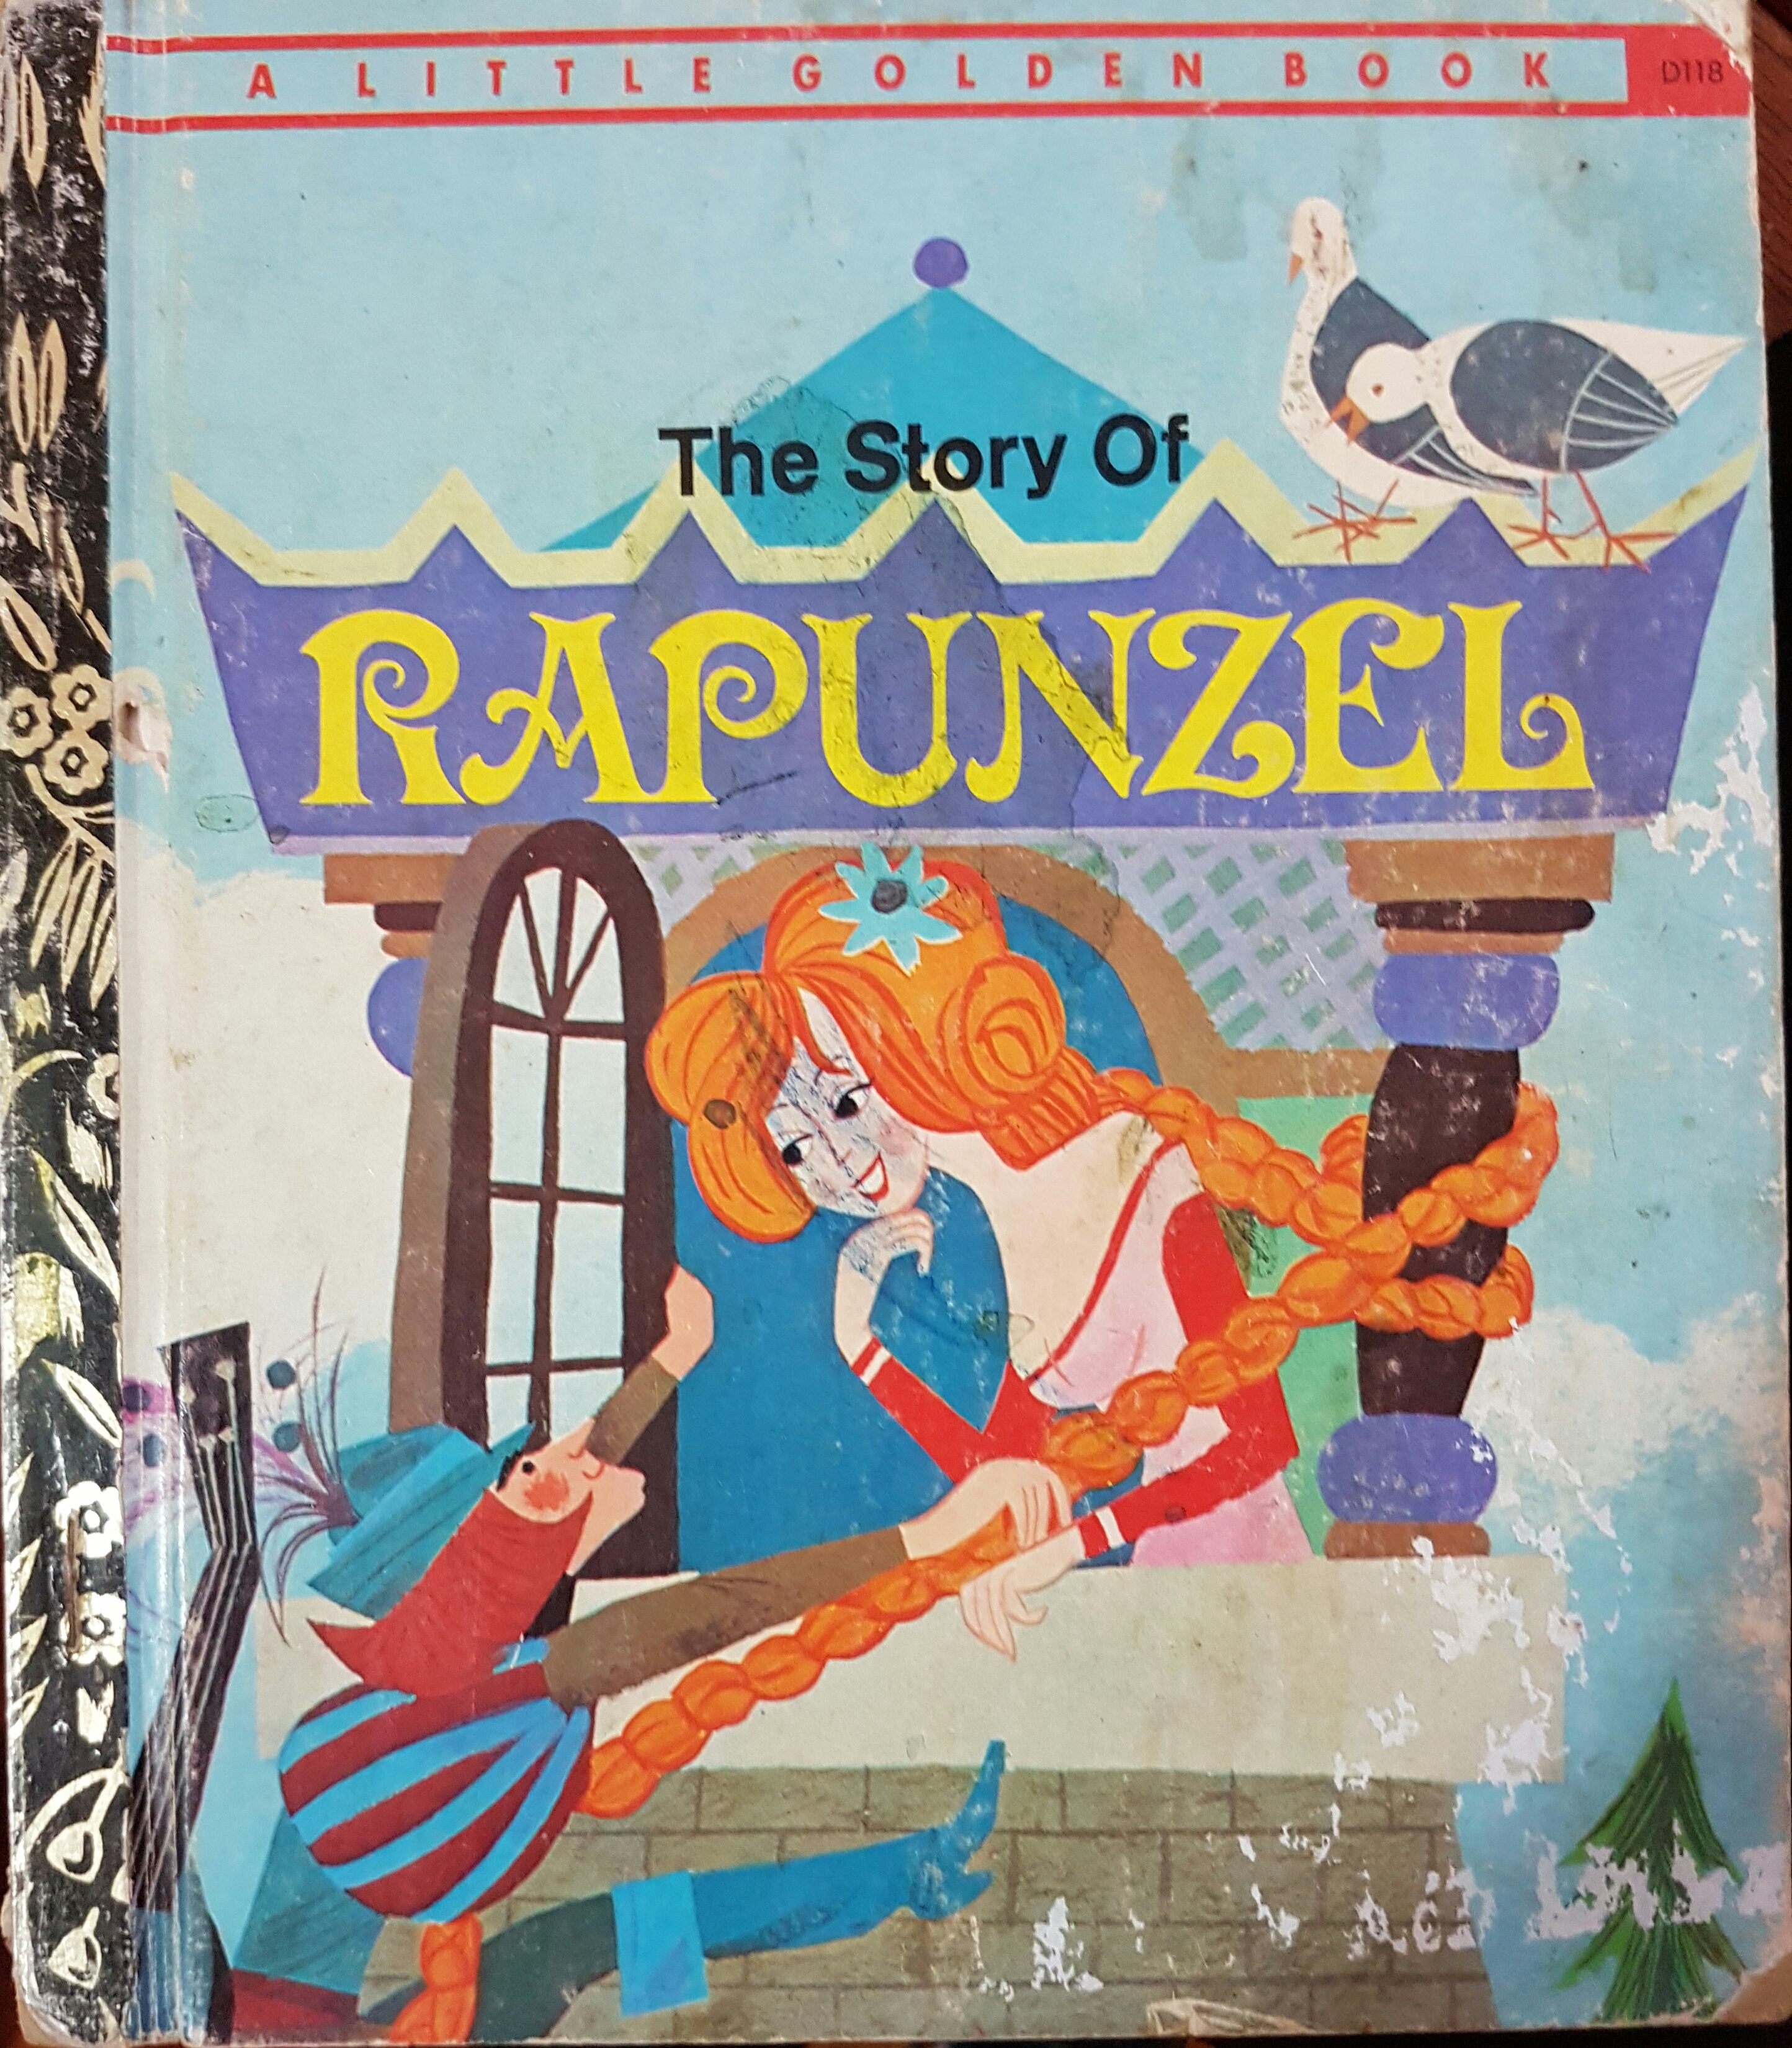 The Story of Rapunzel